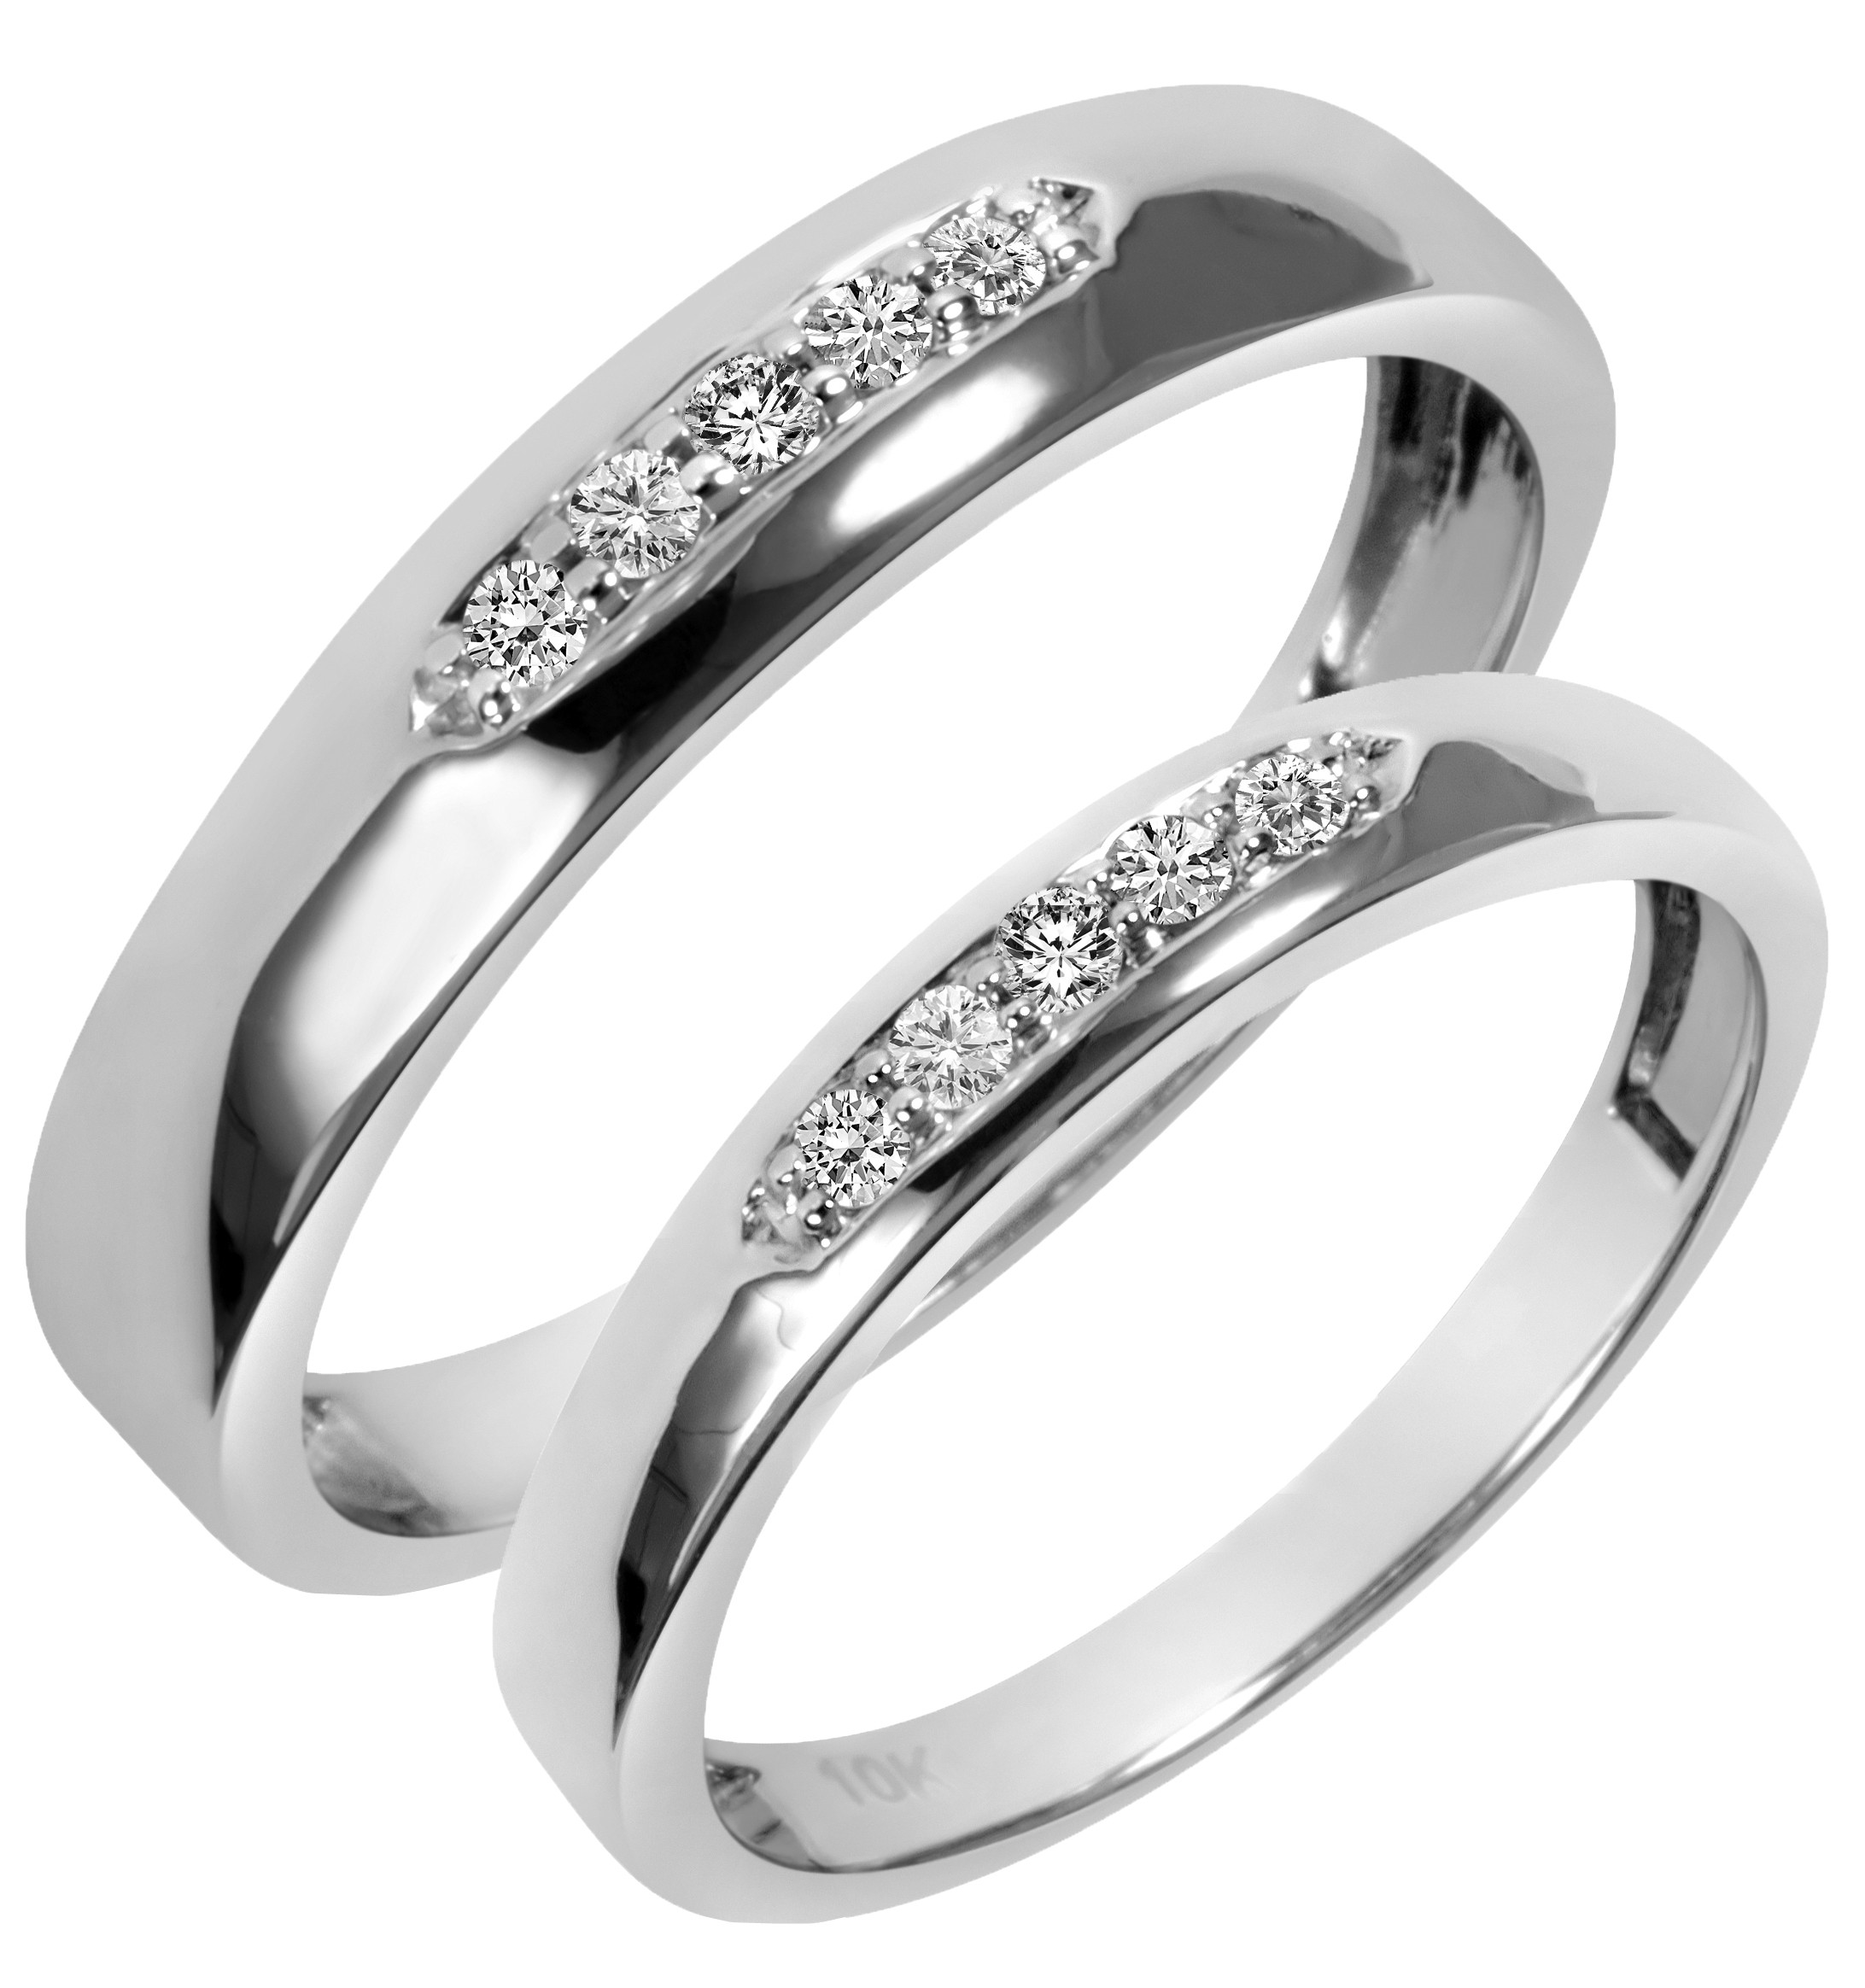 White Gold Wedding Rings For Her
 1 5 Carat T W Diamond His And Hers Wedding Band Set 10K